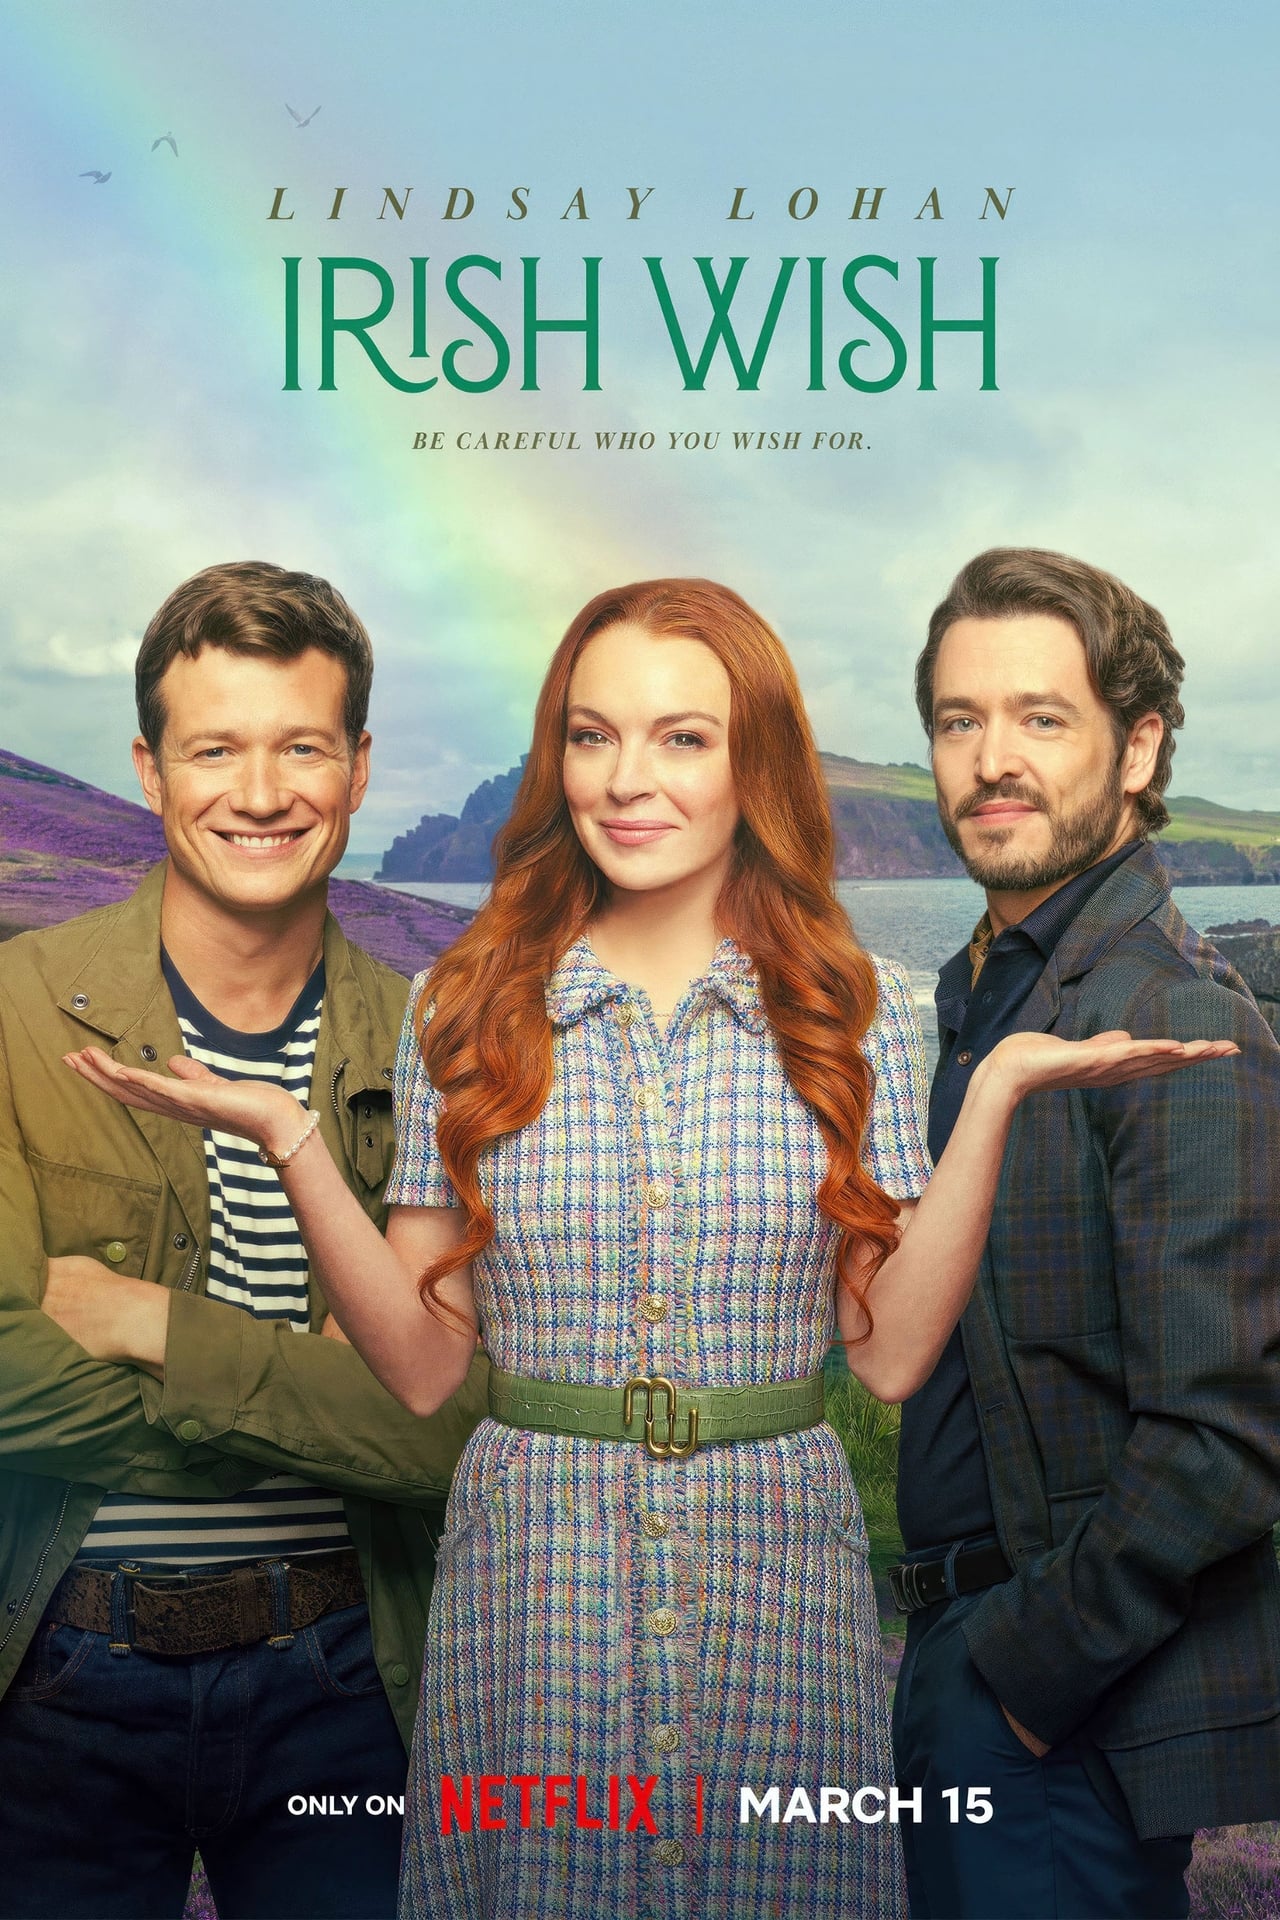 Maddie's dream guy is days away from marrying her best friend when a wish for true love made on an ancient stone in Ireland magically alters her fate.